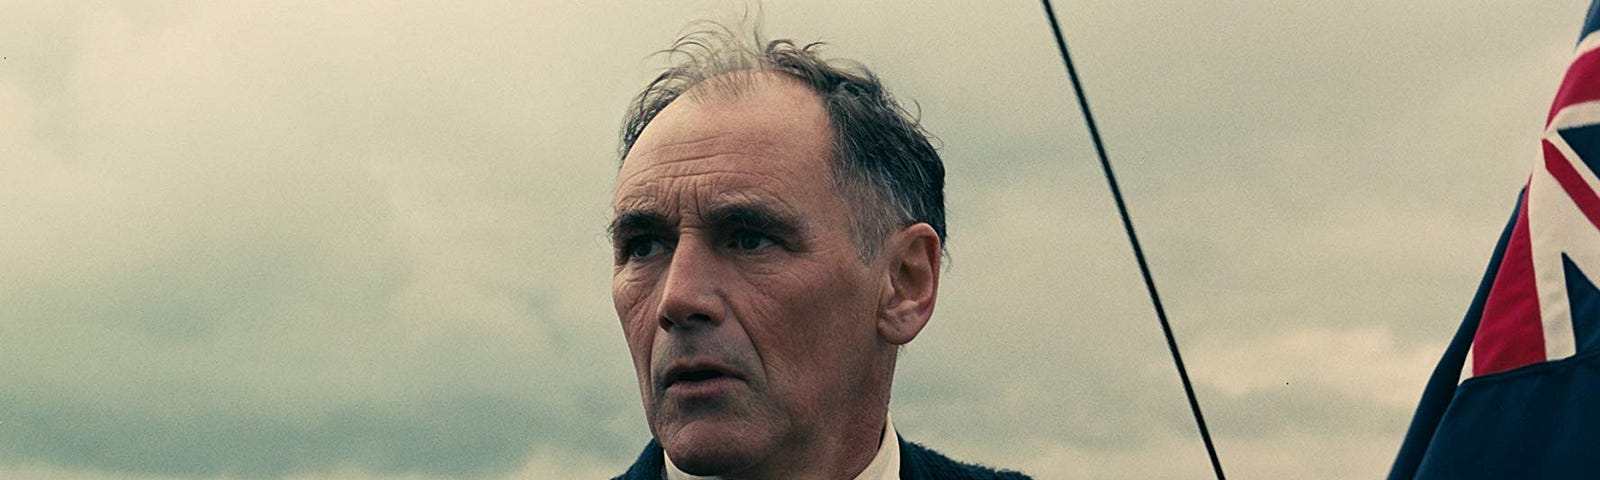 A photo of Mr. Rylance looking out over the ocean from the 2017 film Dunkirk.